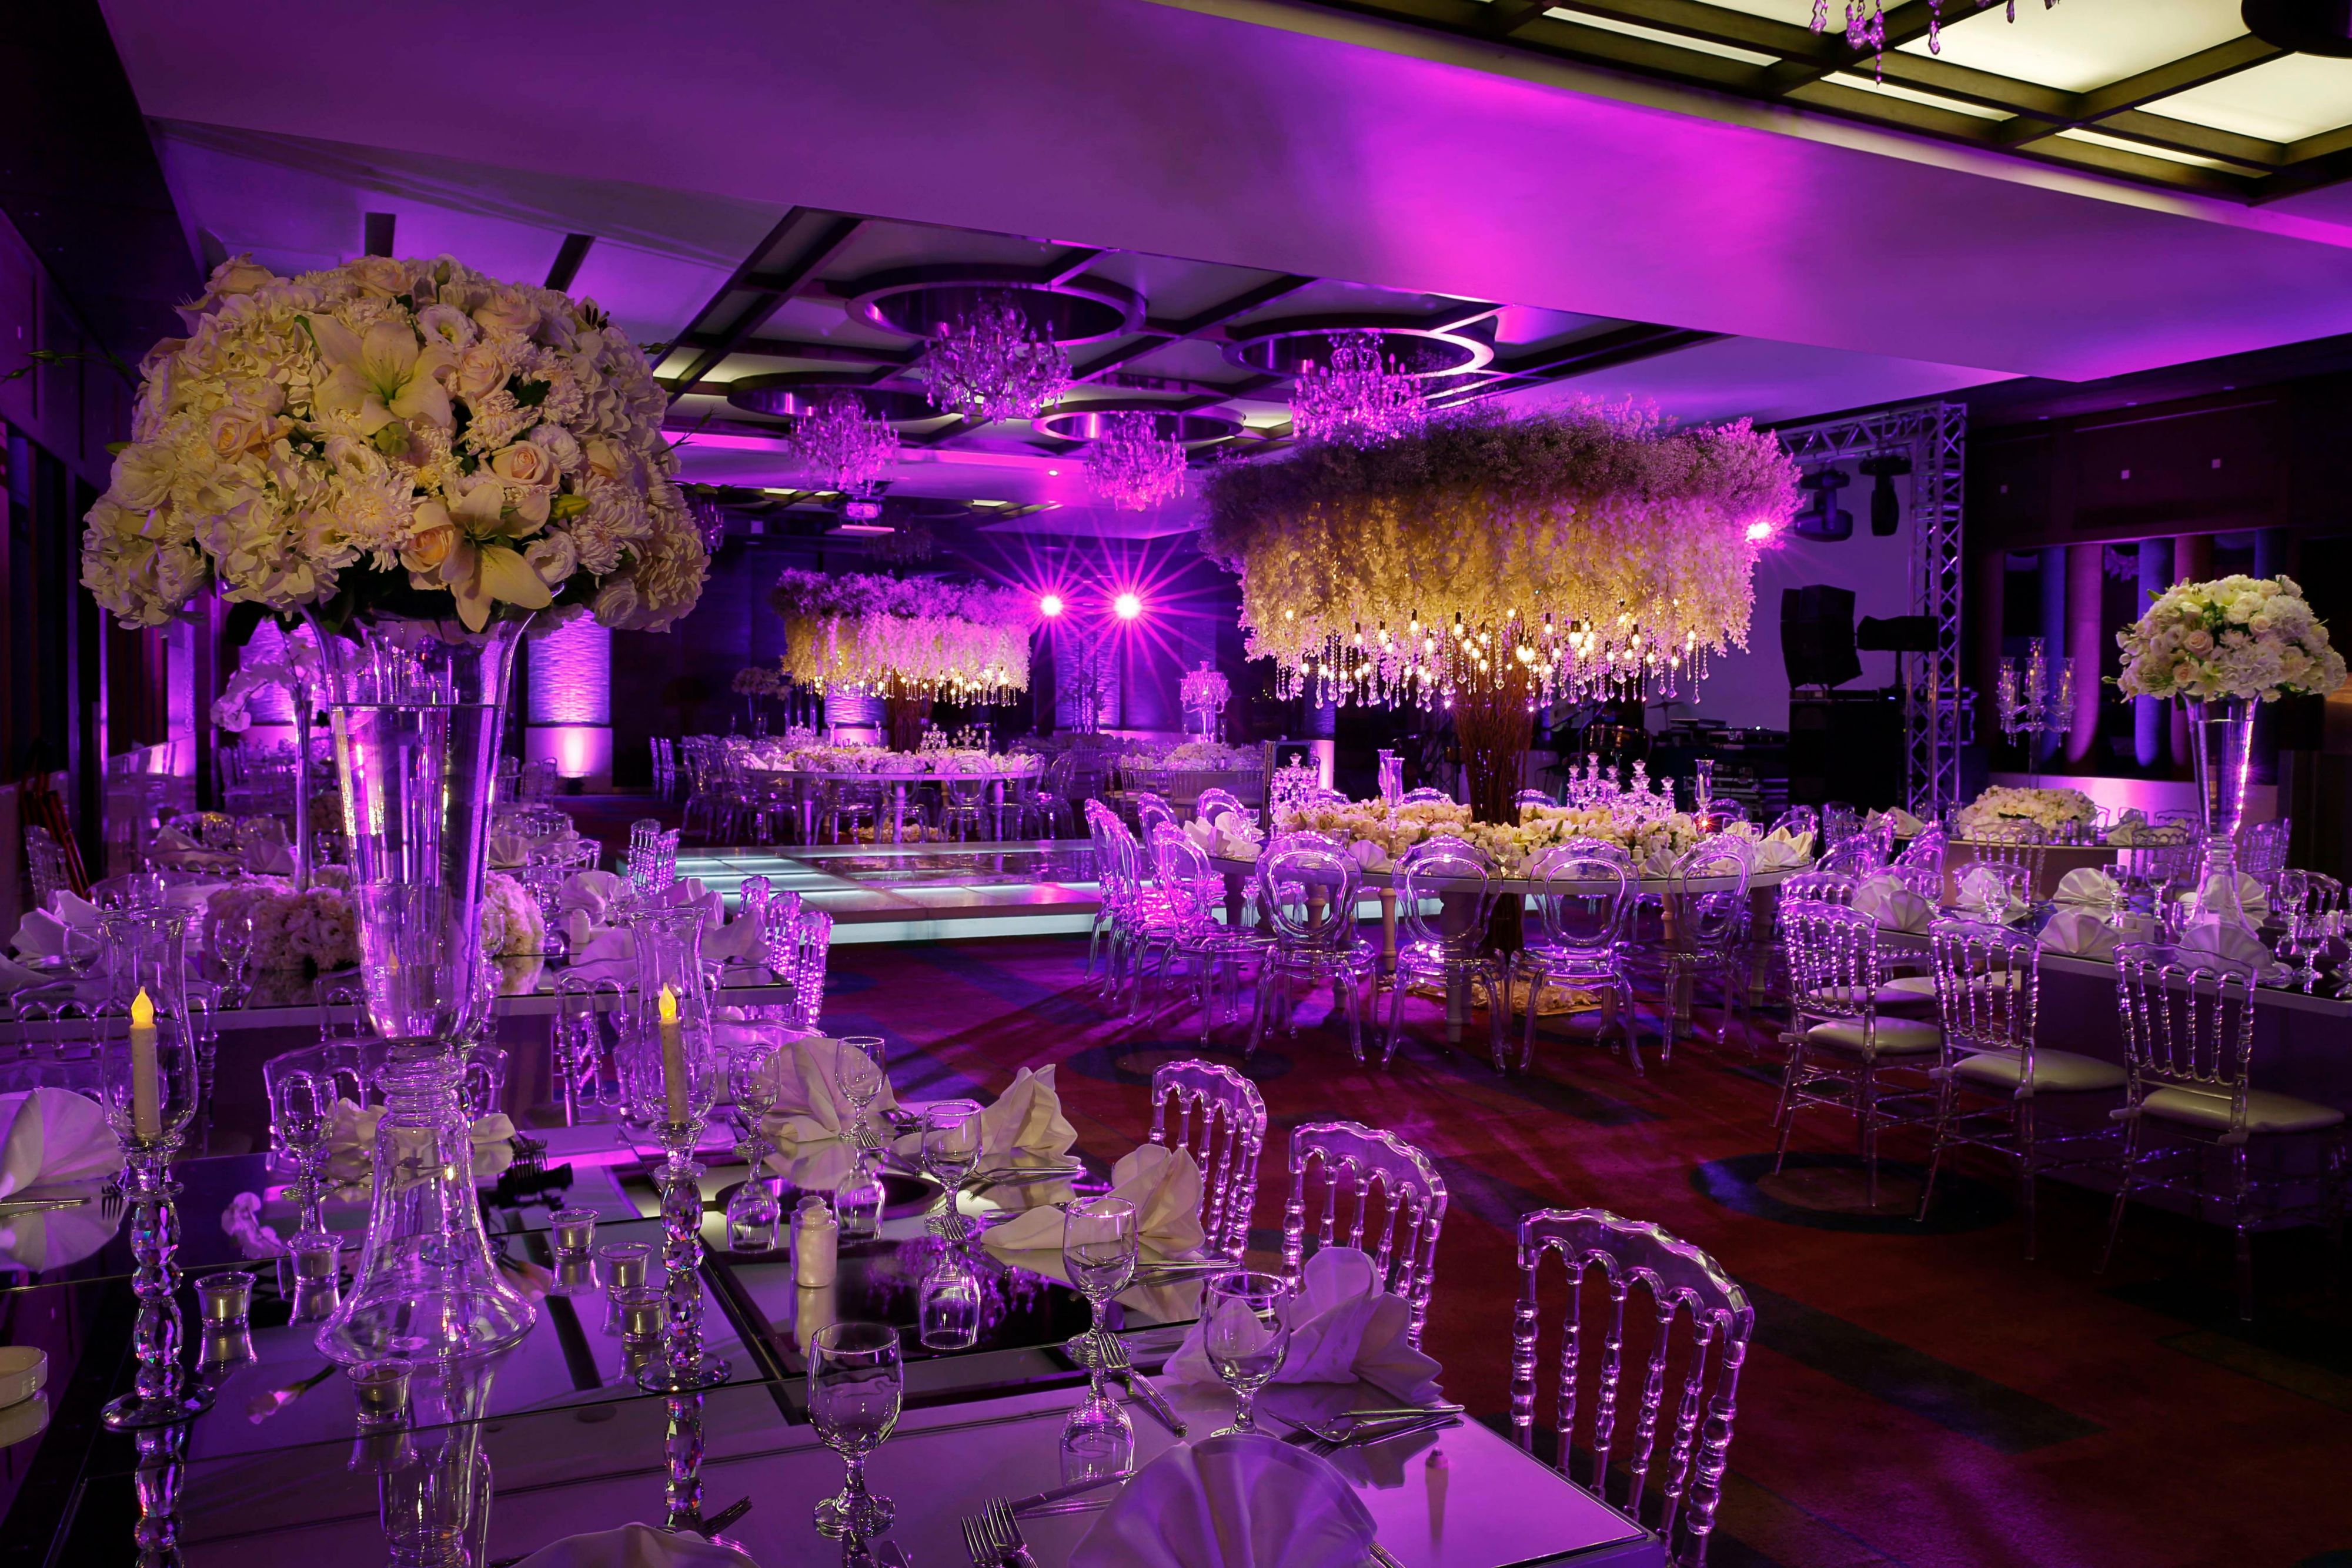 Nabatean Ballroom; A Contemporary Venue Perfect for any Occassion